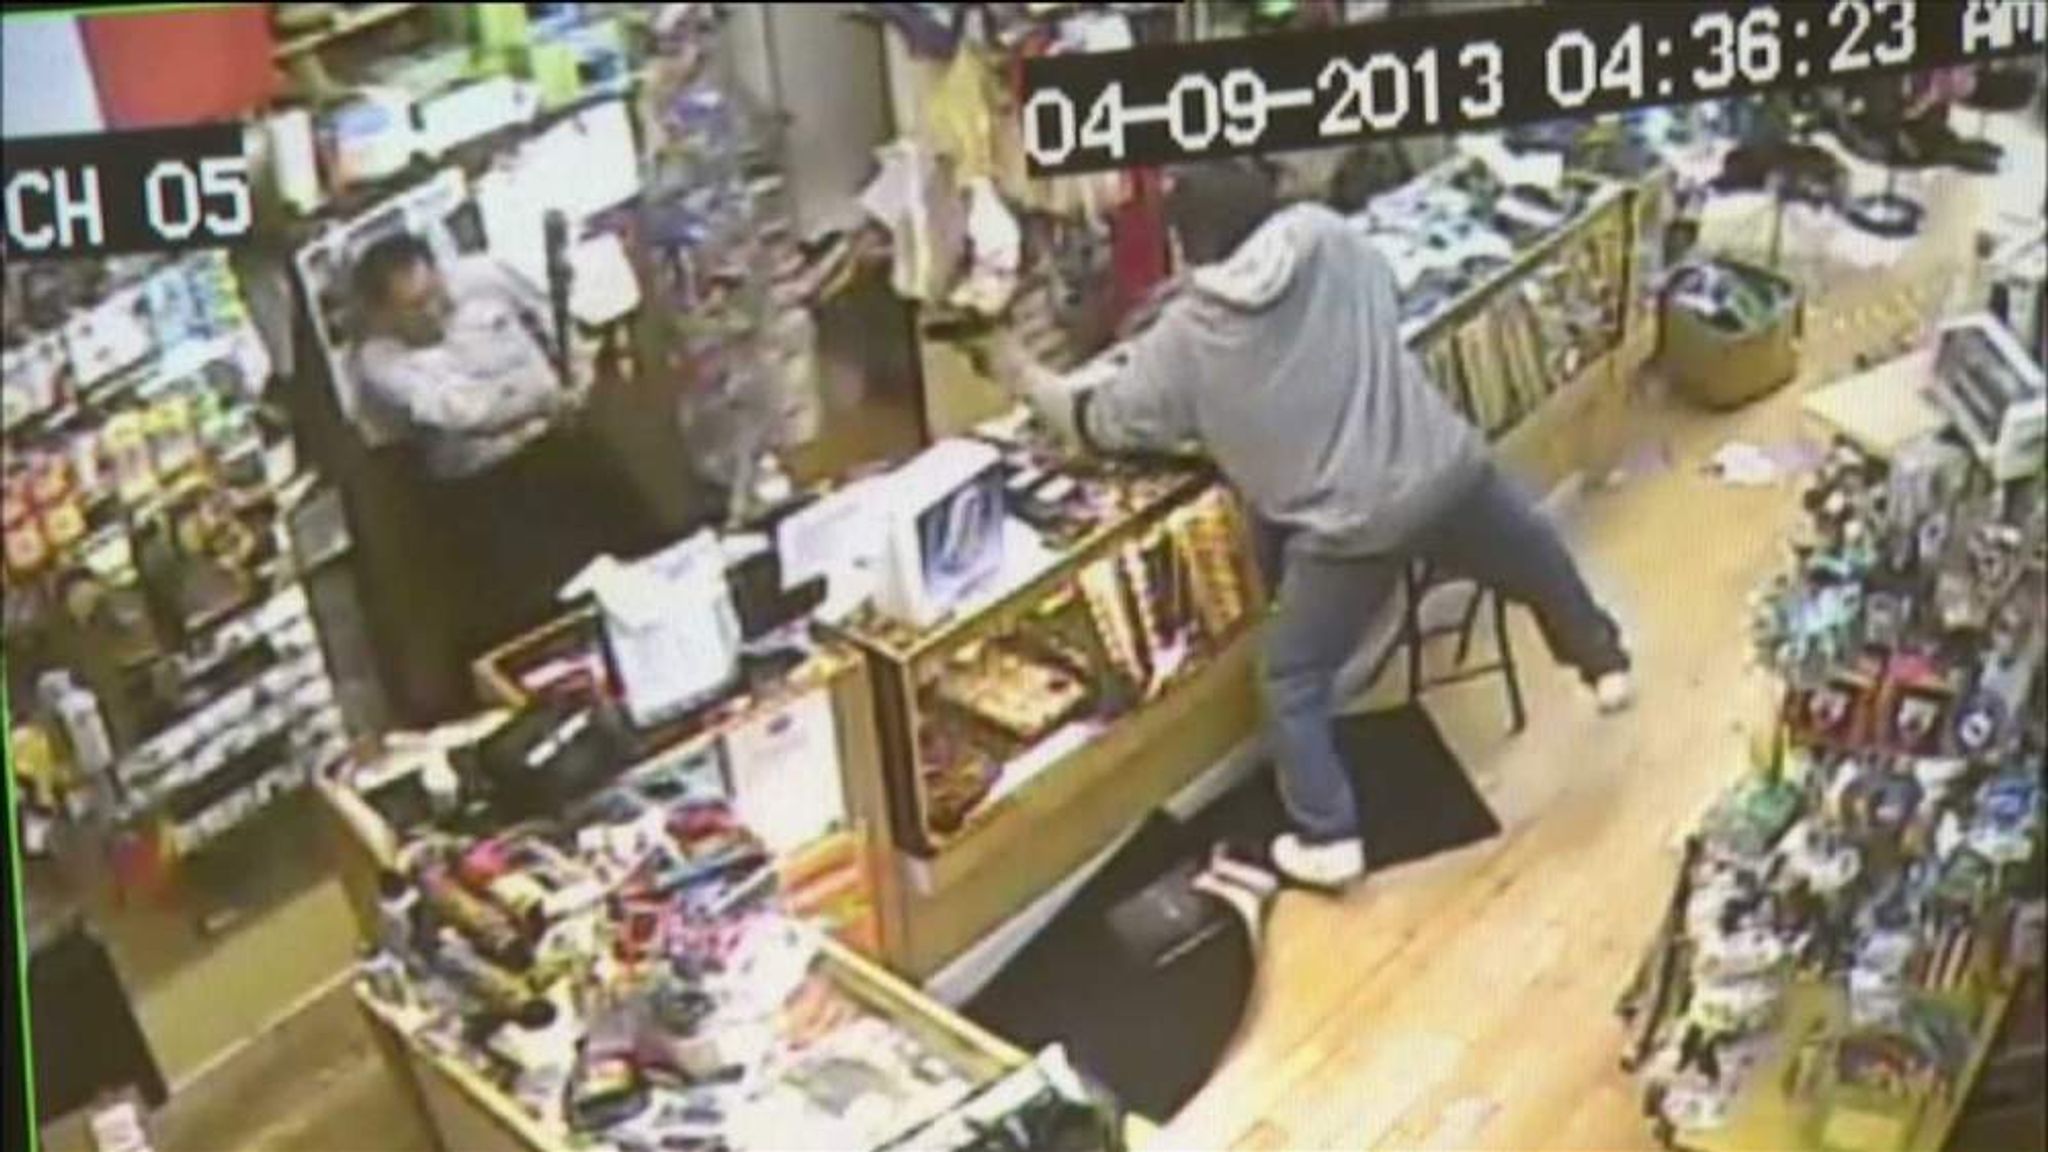 Convenience store owner fights off robber with baseball bat